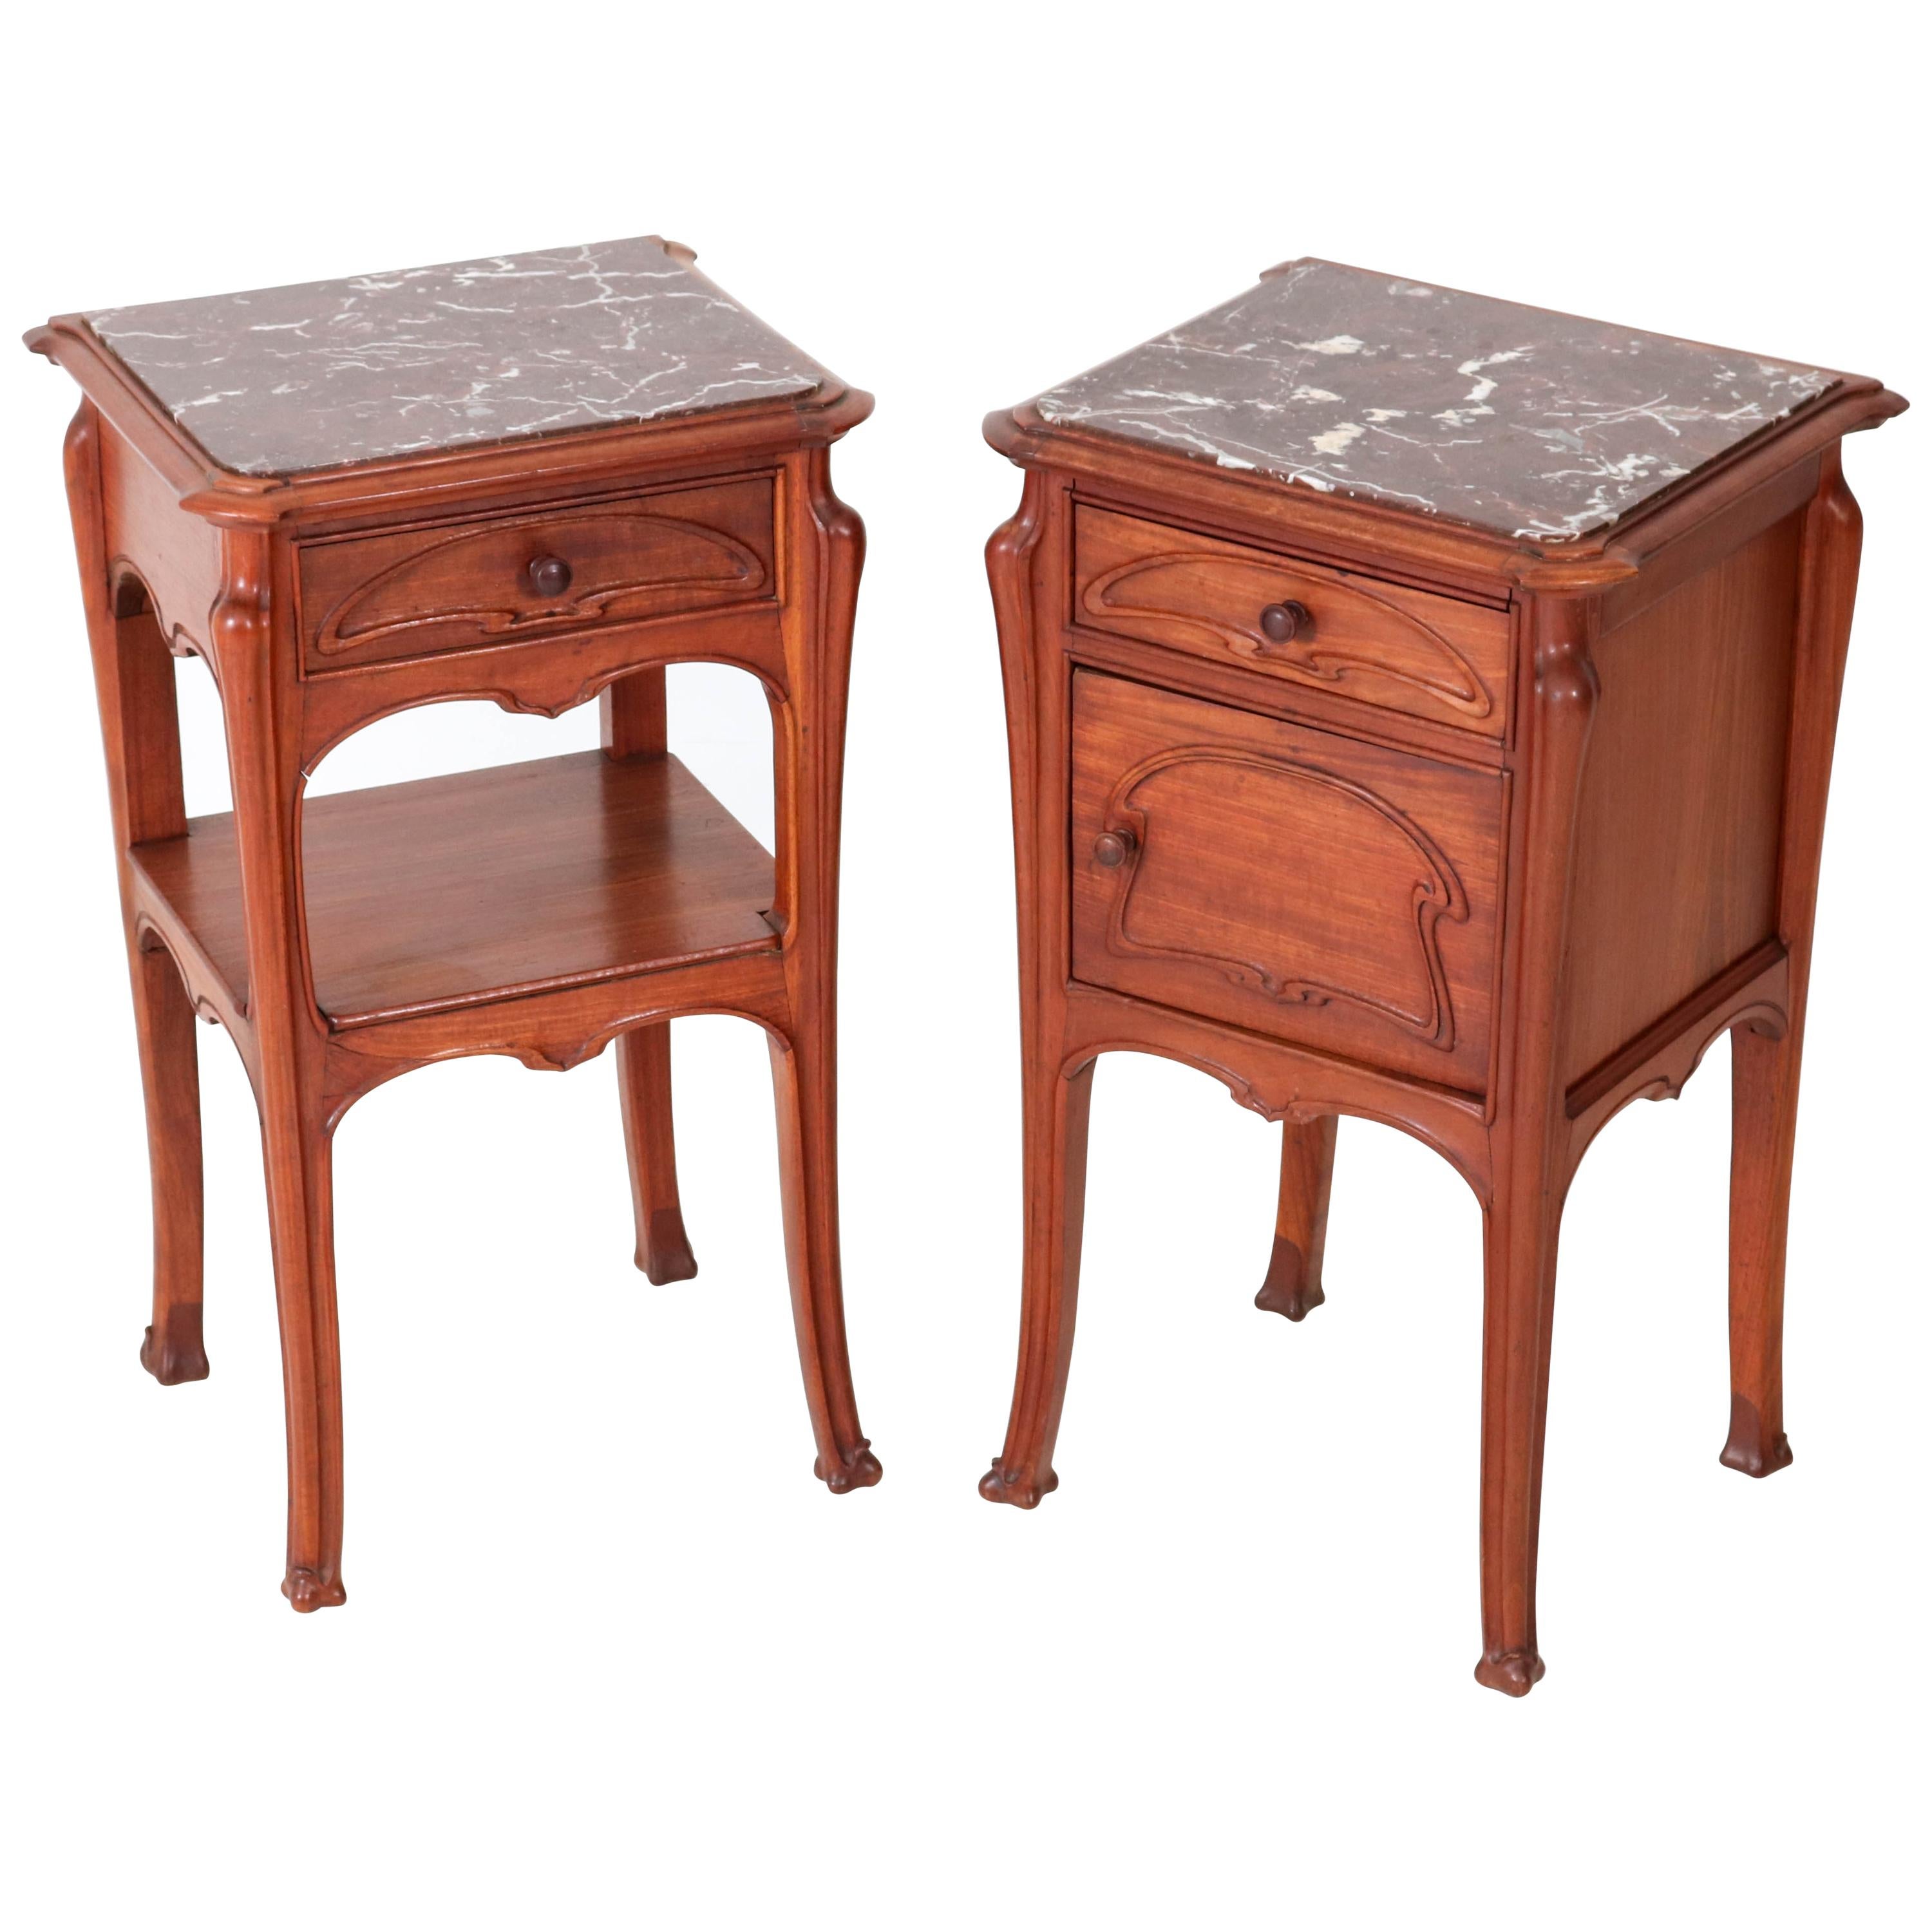 Pair of French Art Nouveau Majorelle Style Nightstands or Bedside Tables, 1900s